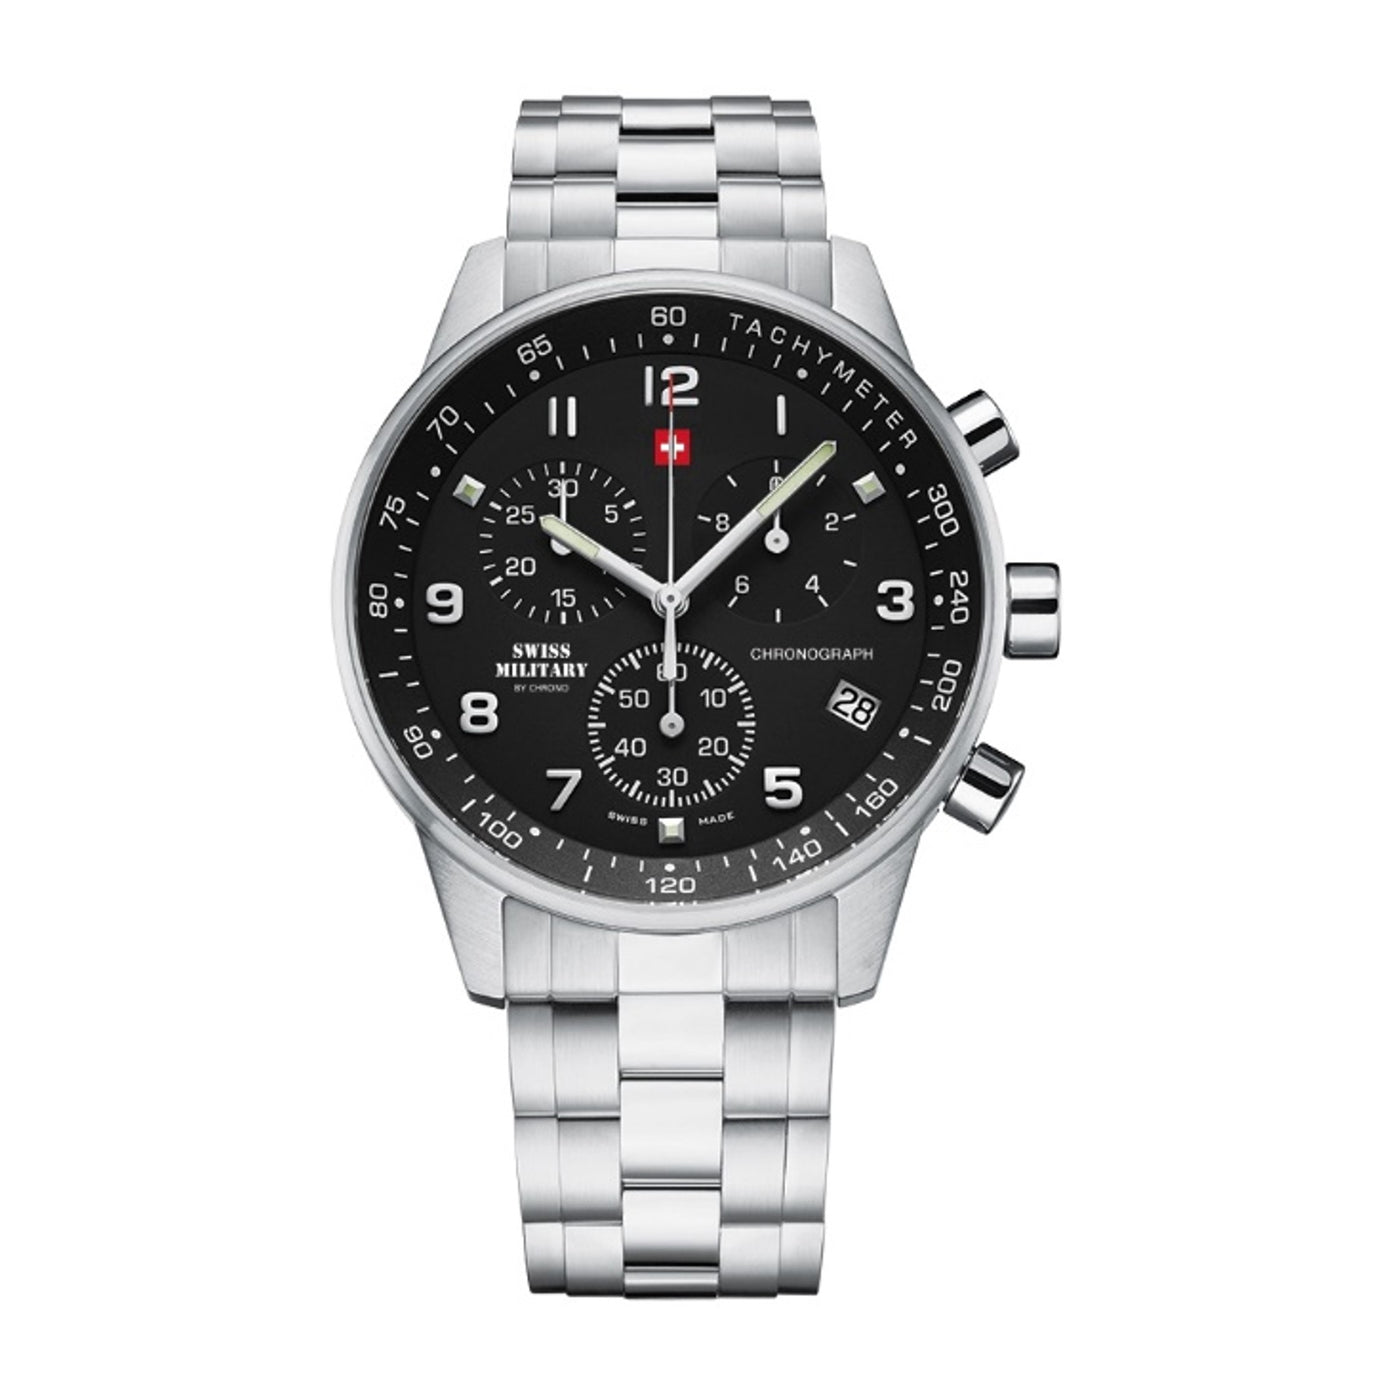 SM34012 Chronograph 41mm Stainless Steel Band